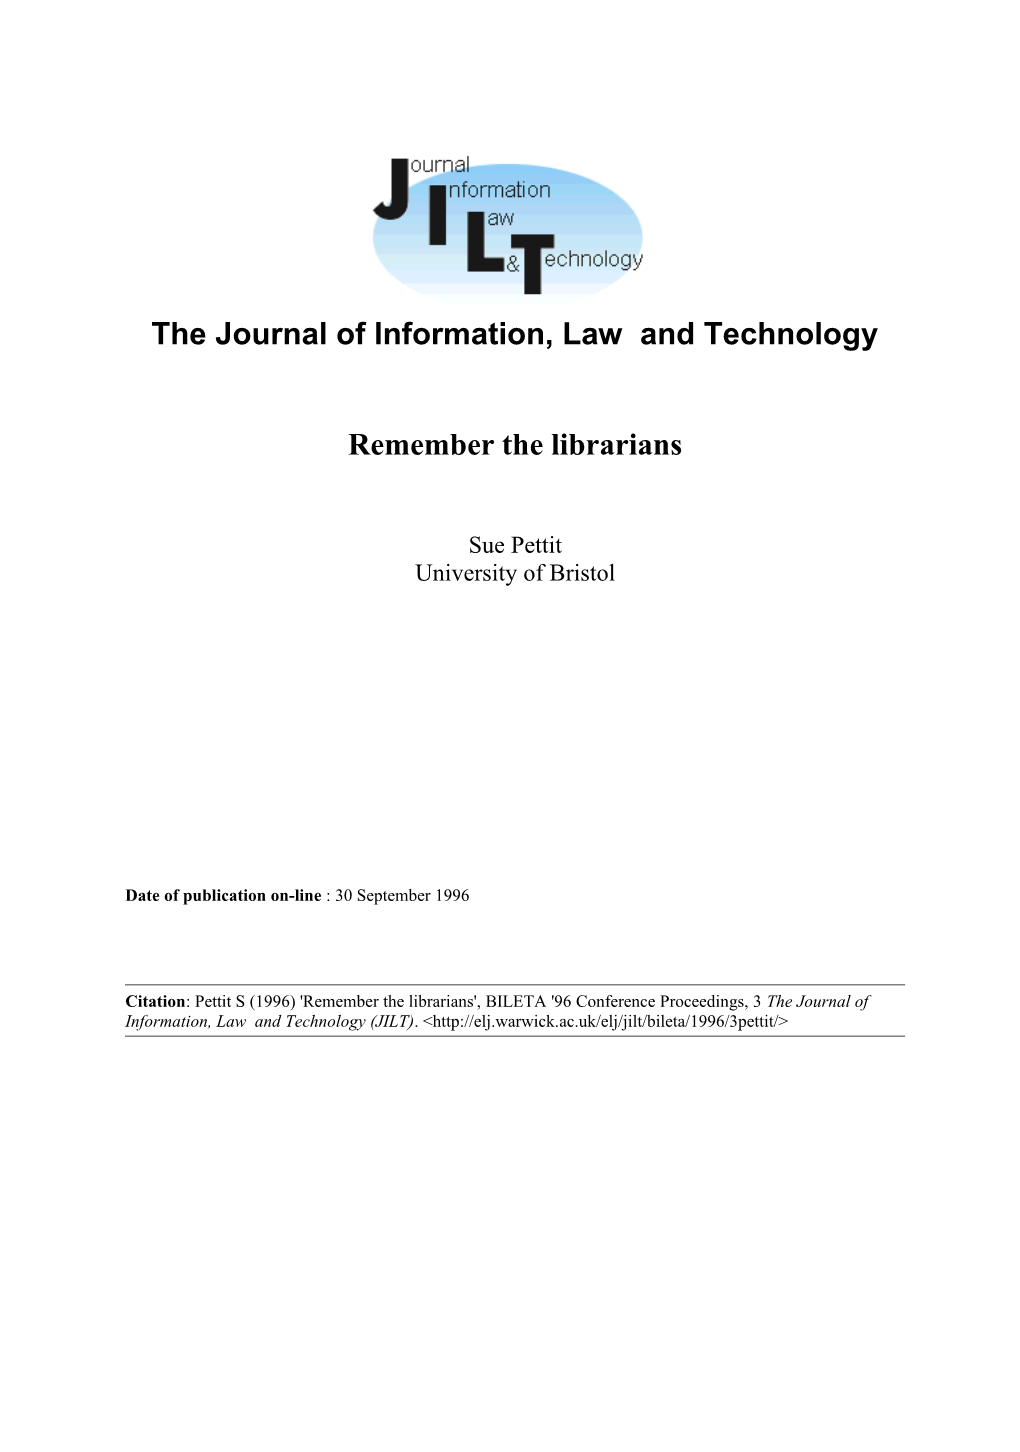 The Journal of Information, Law and Technology